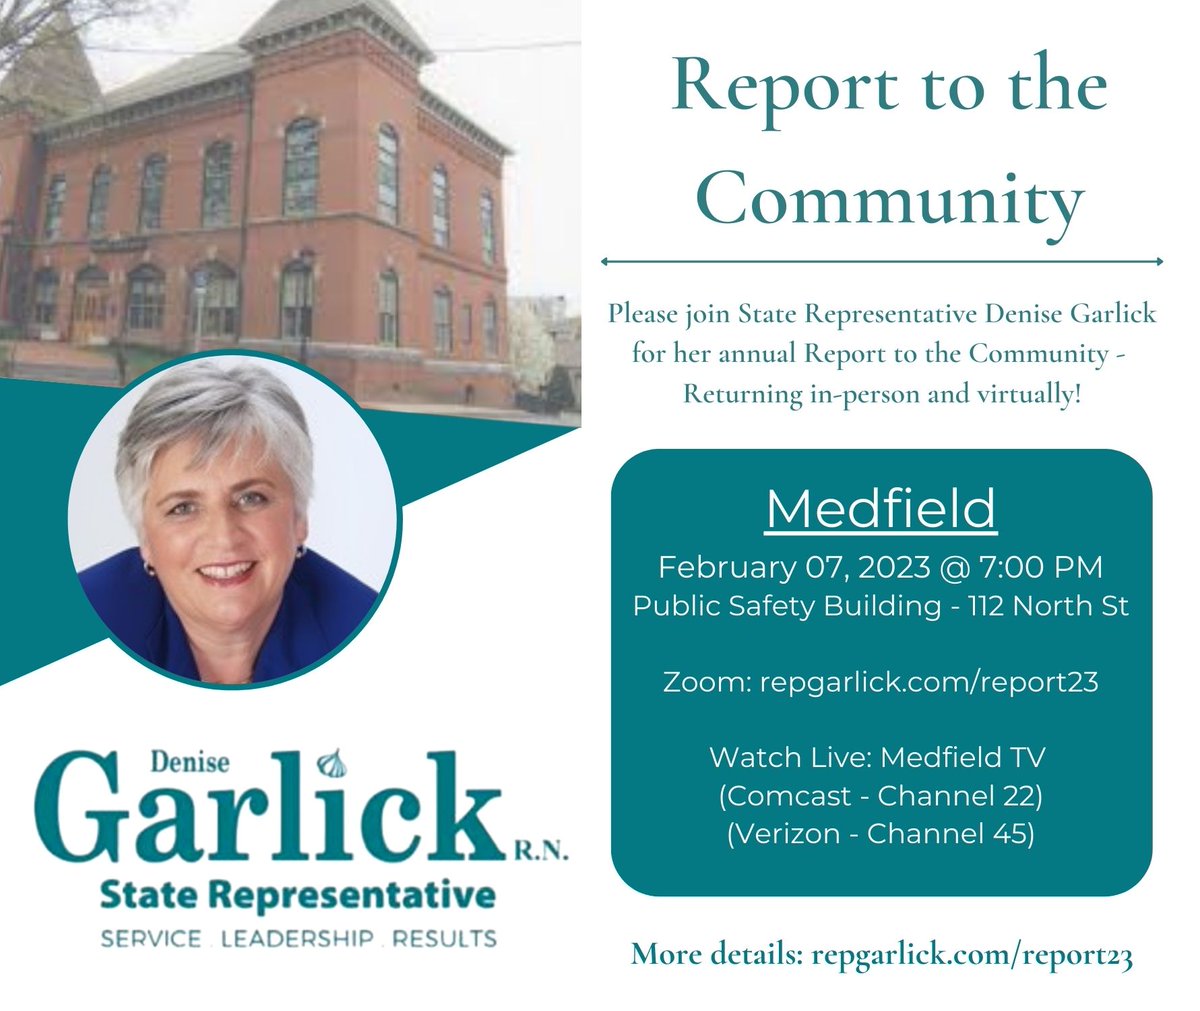 MEDFIELD - I look forward to seeing you all tonight at my annual Report to the Community!